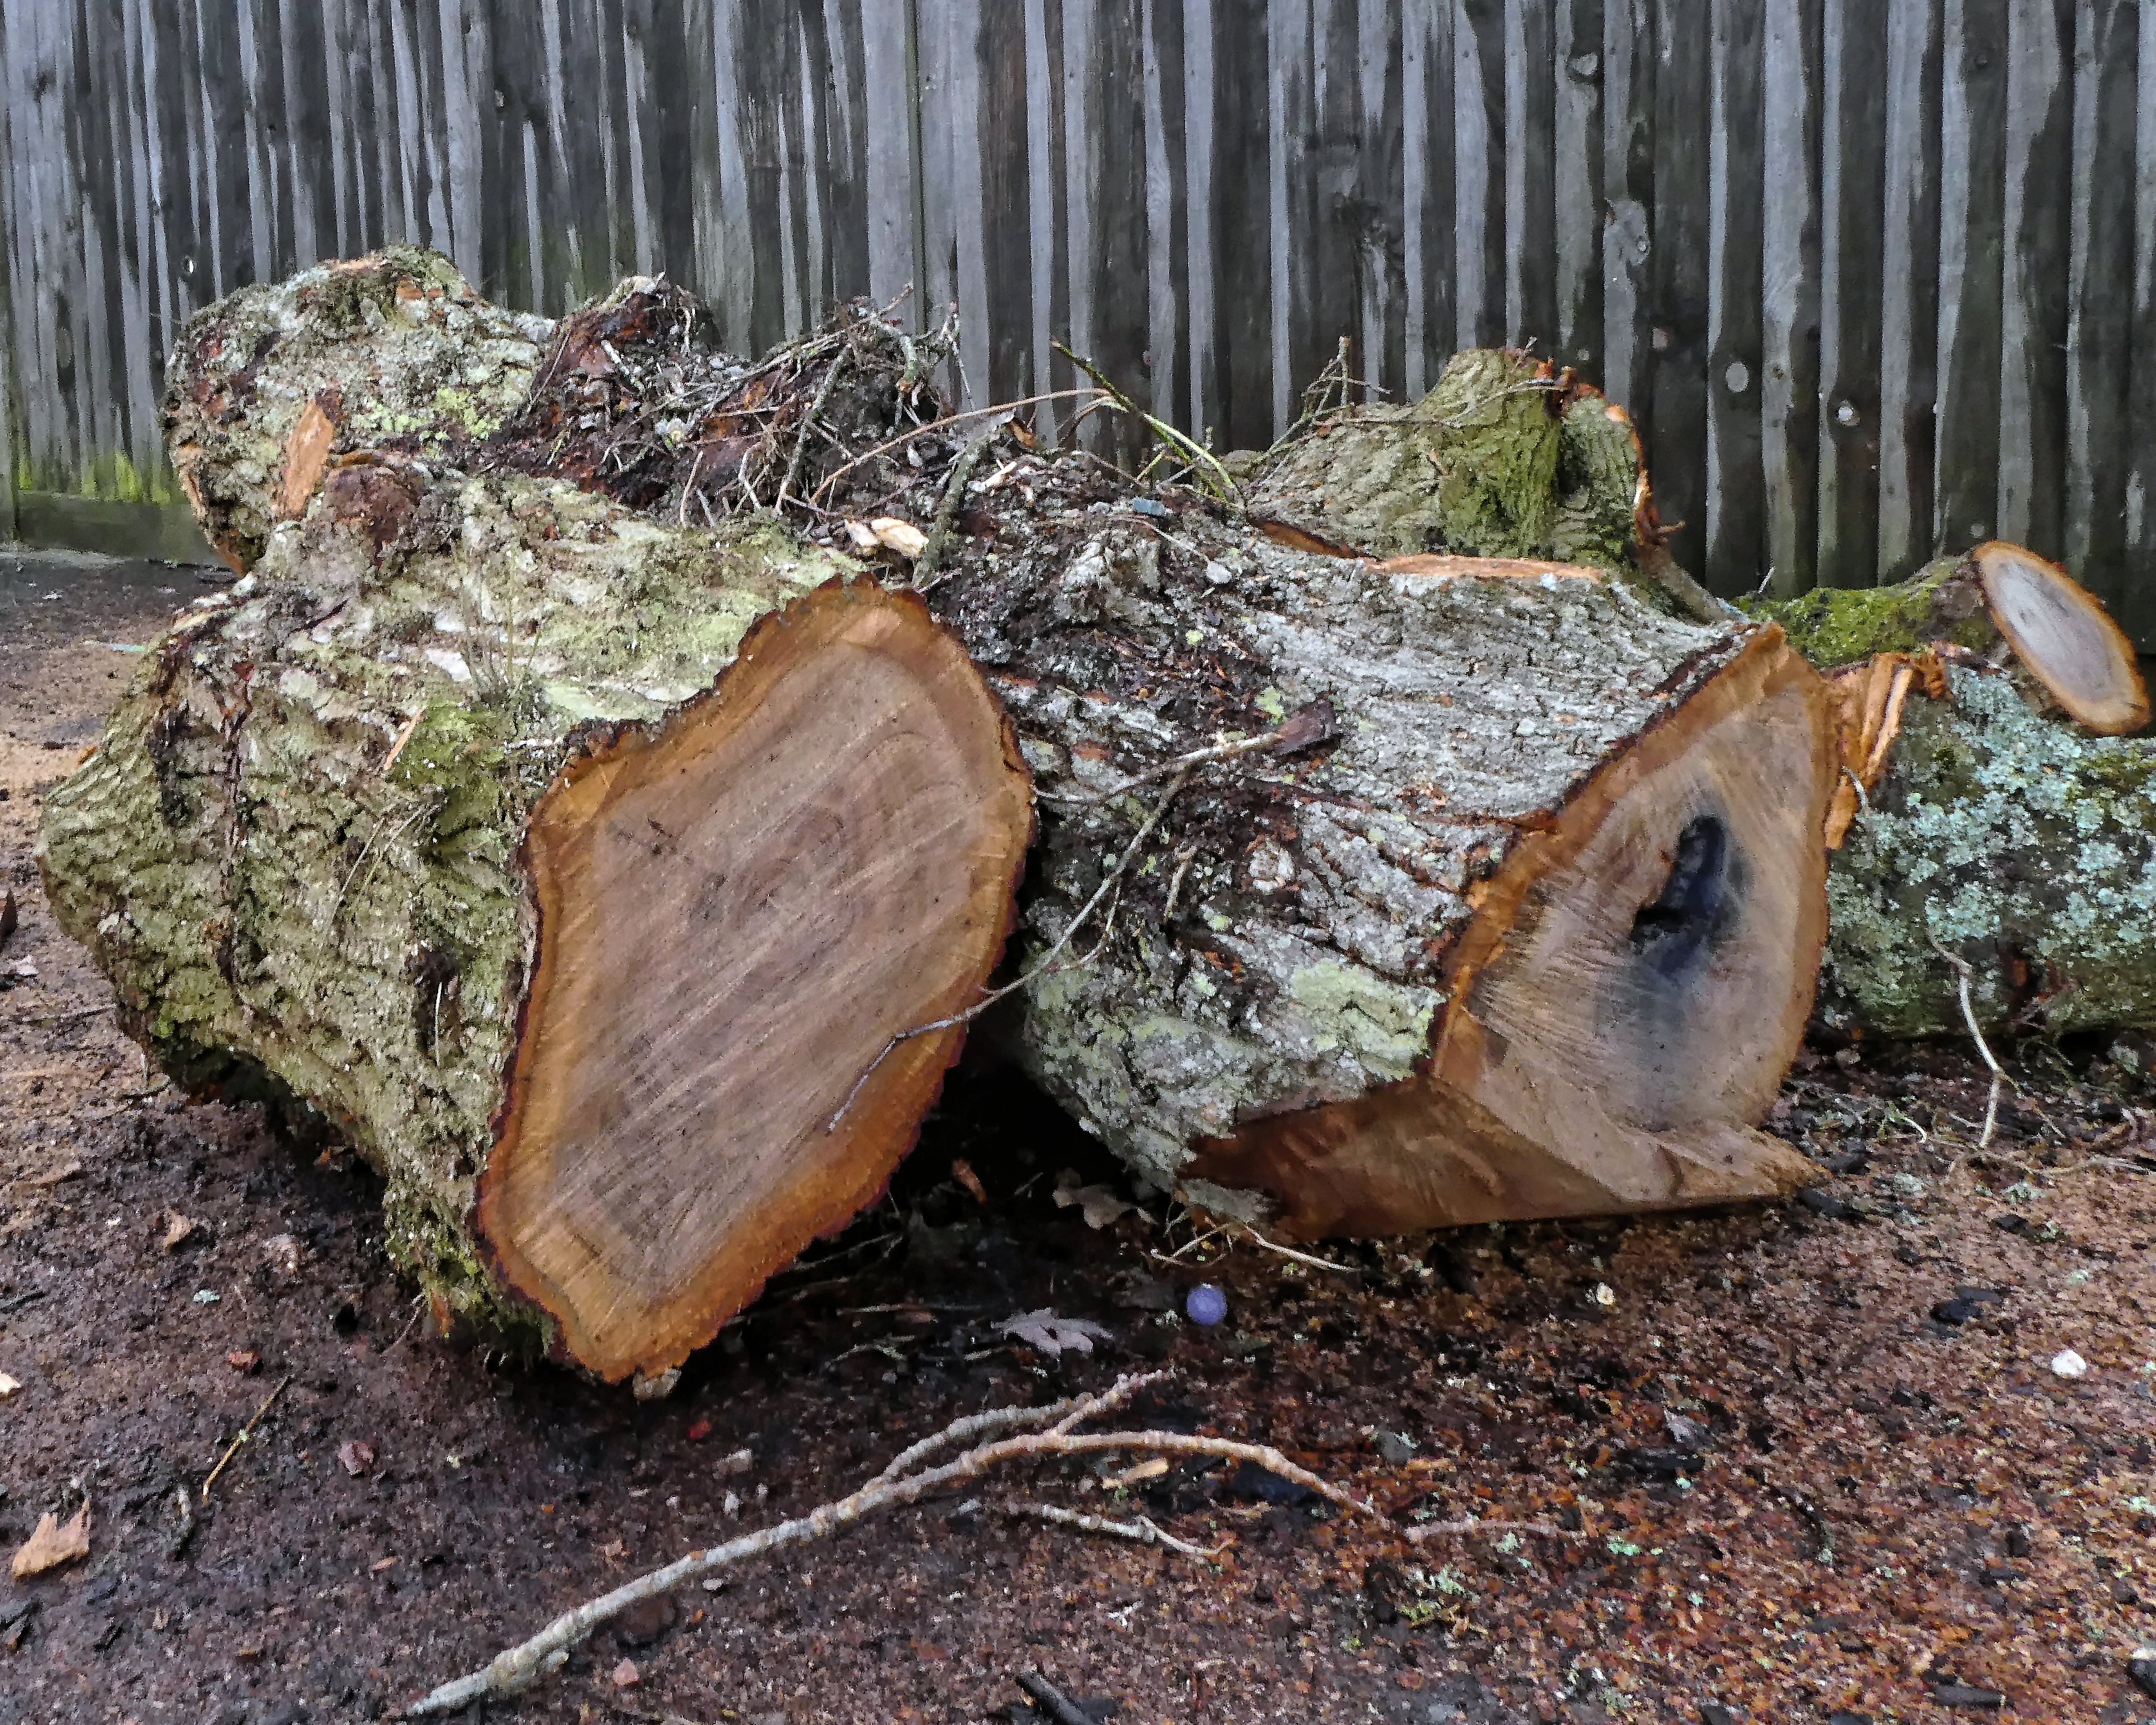 https://upload.wikimedia.org/wikipedia/commons/0/03/Cut_tree_trunks_at_The_Plough_in_Lower_Beeding%2C_West_Sussex%2C_England.jpg